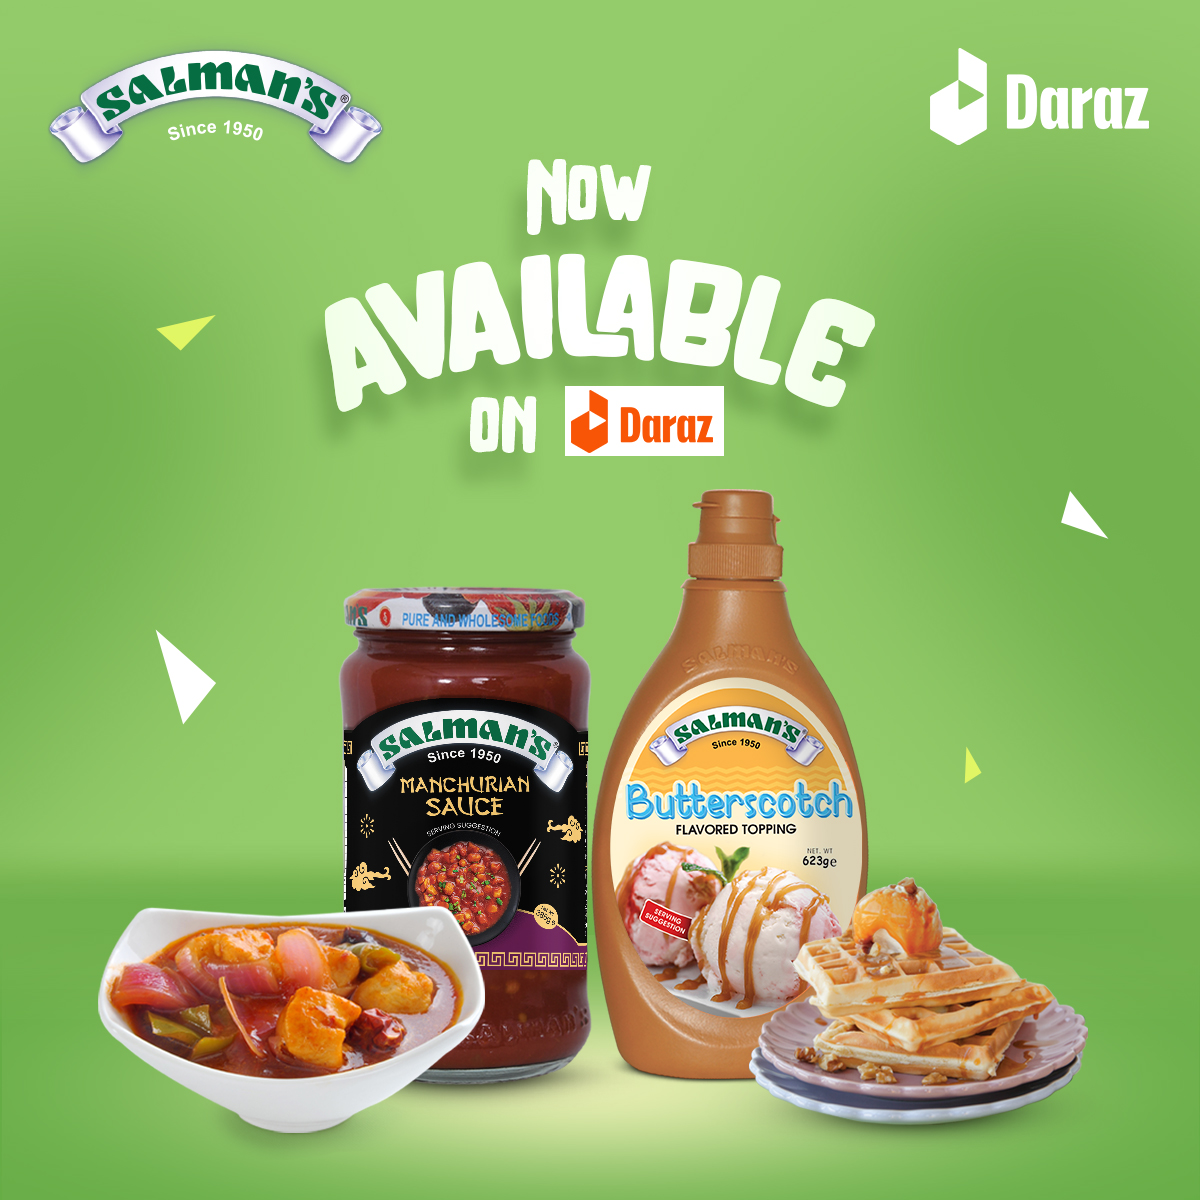 You can now find our Manchurian Sauce and Butterscotch Topping available on our Daraz. So you can get our products delivered to your doorstep with just a click of a button. bit.ly/salmans

#Salmans #Since1950 #SalmansProudlyMadeInPakistan #Daraz #NowAvailable